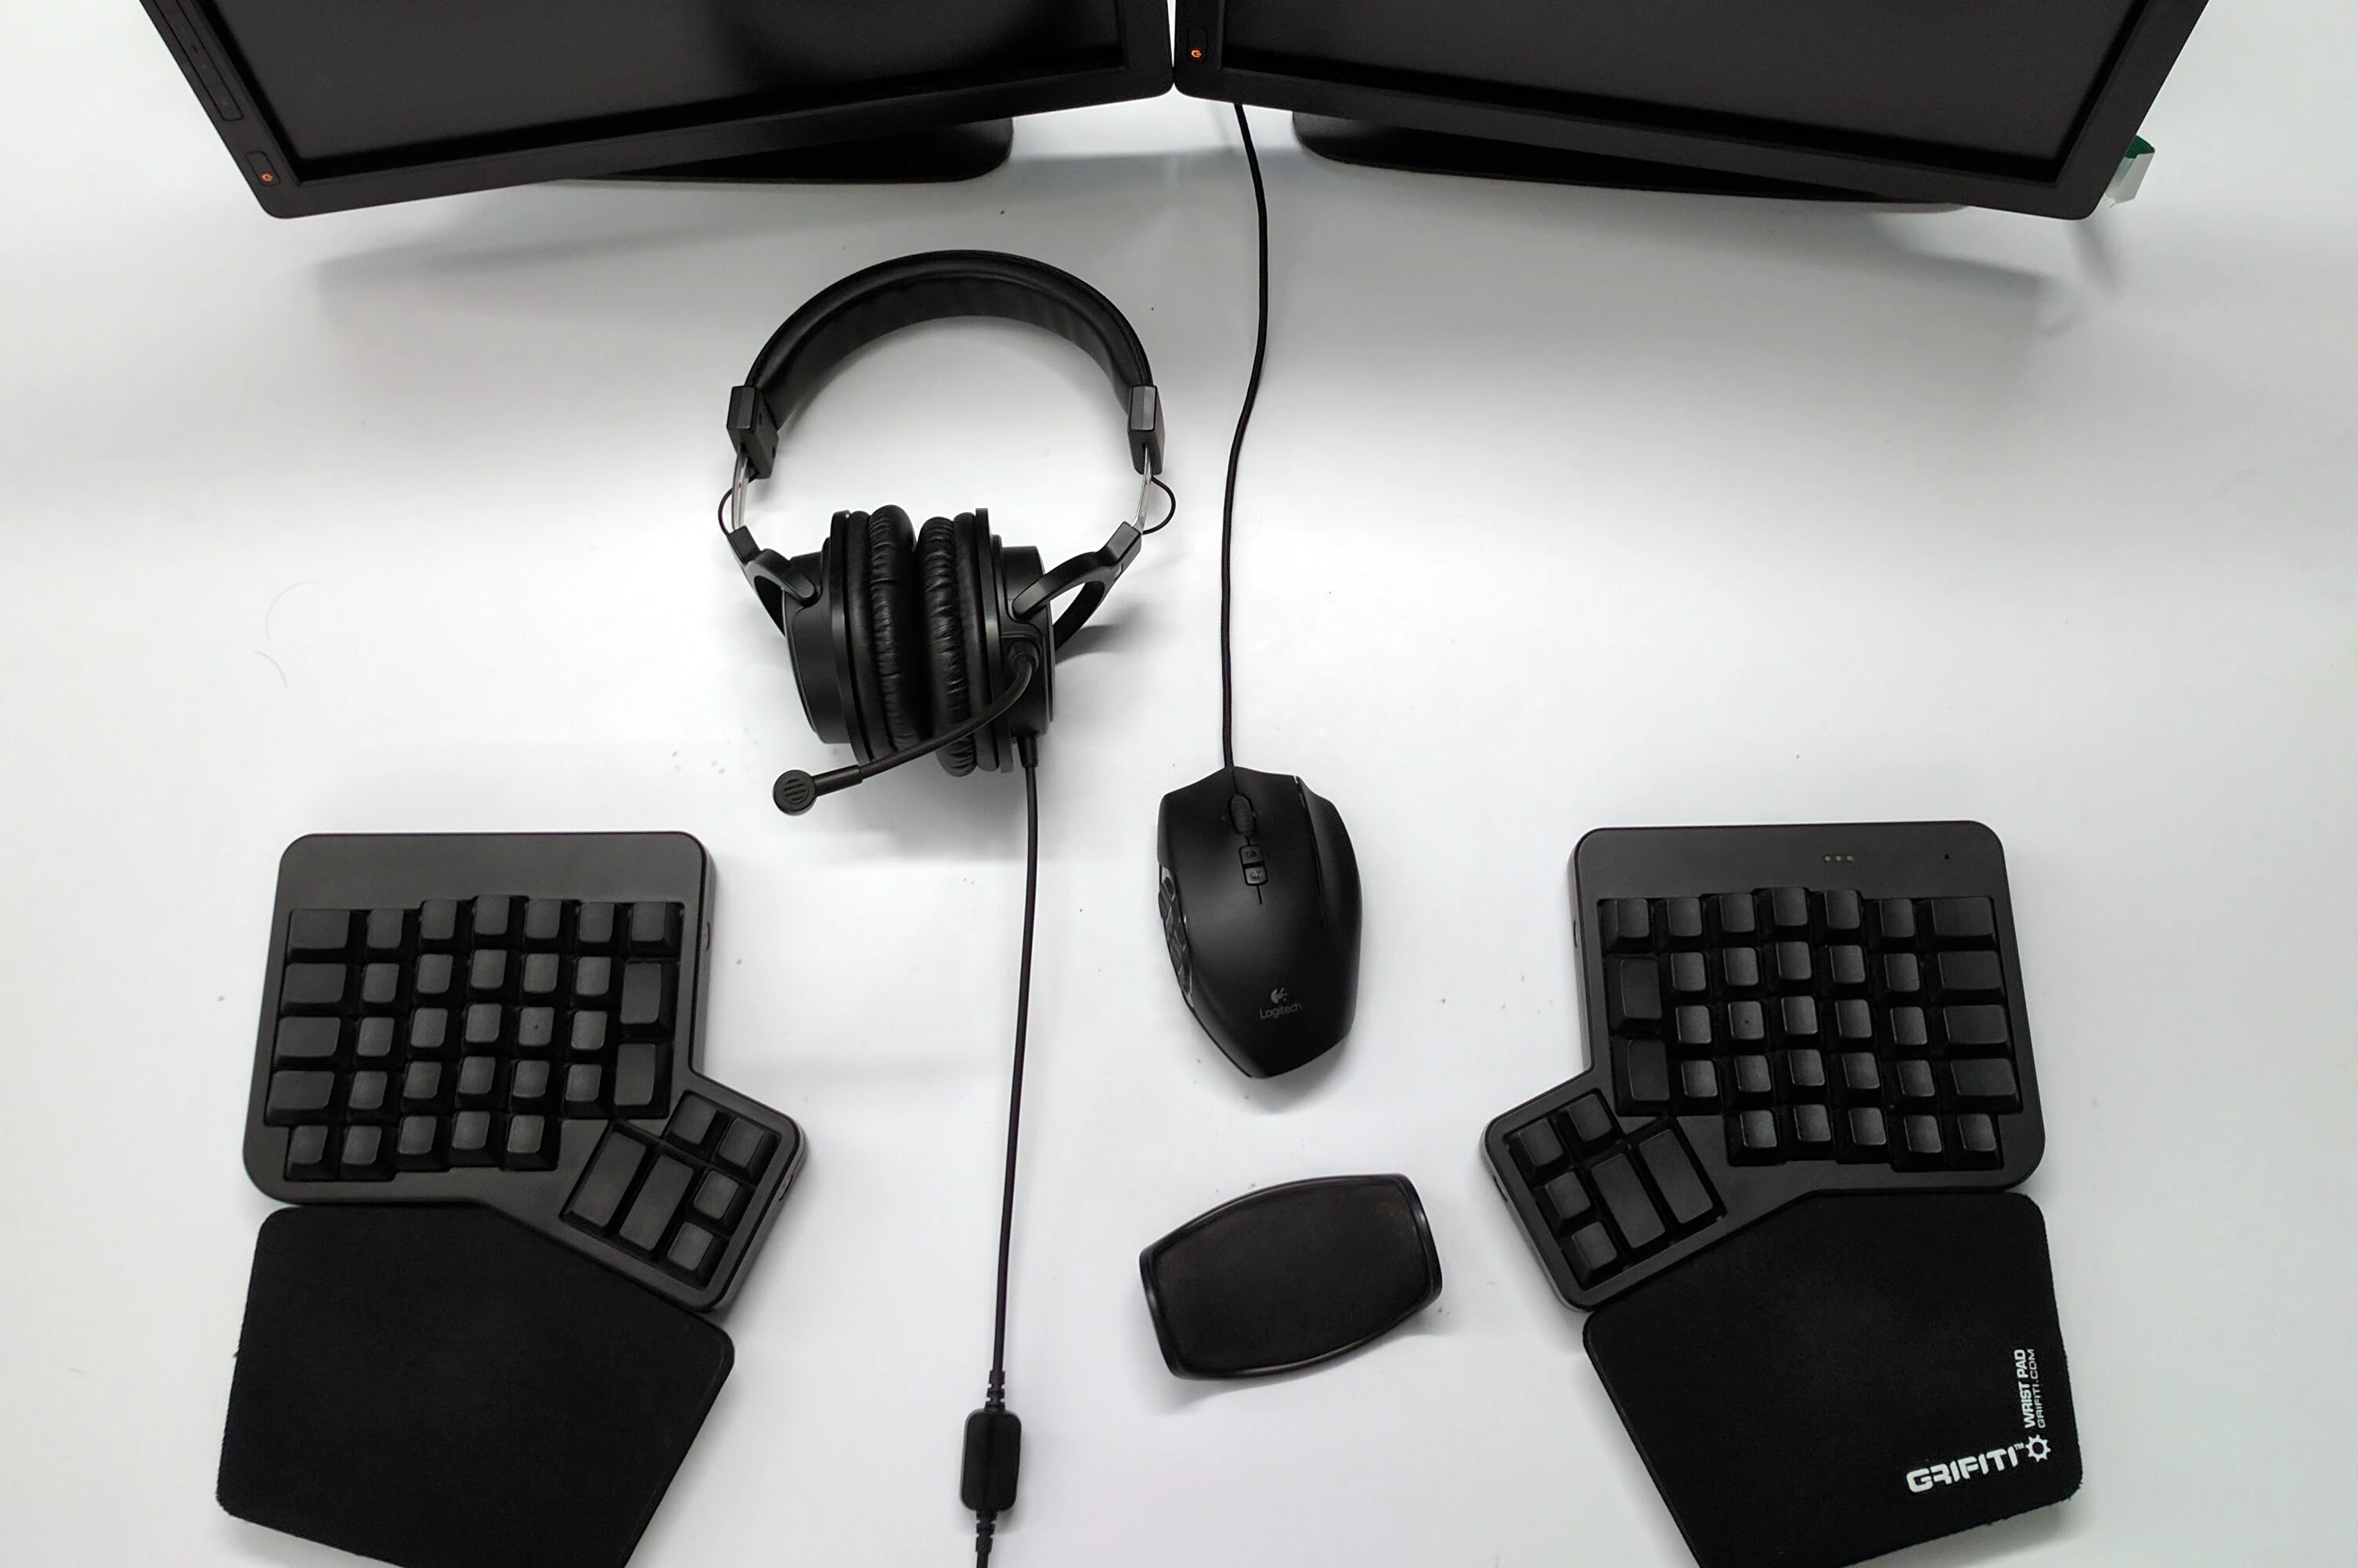 Two halves of a split keyboard flank both sides of a mouse and a pair of headphones against the backdrop of a stark white desk surface.